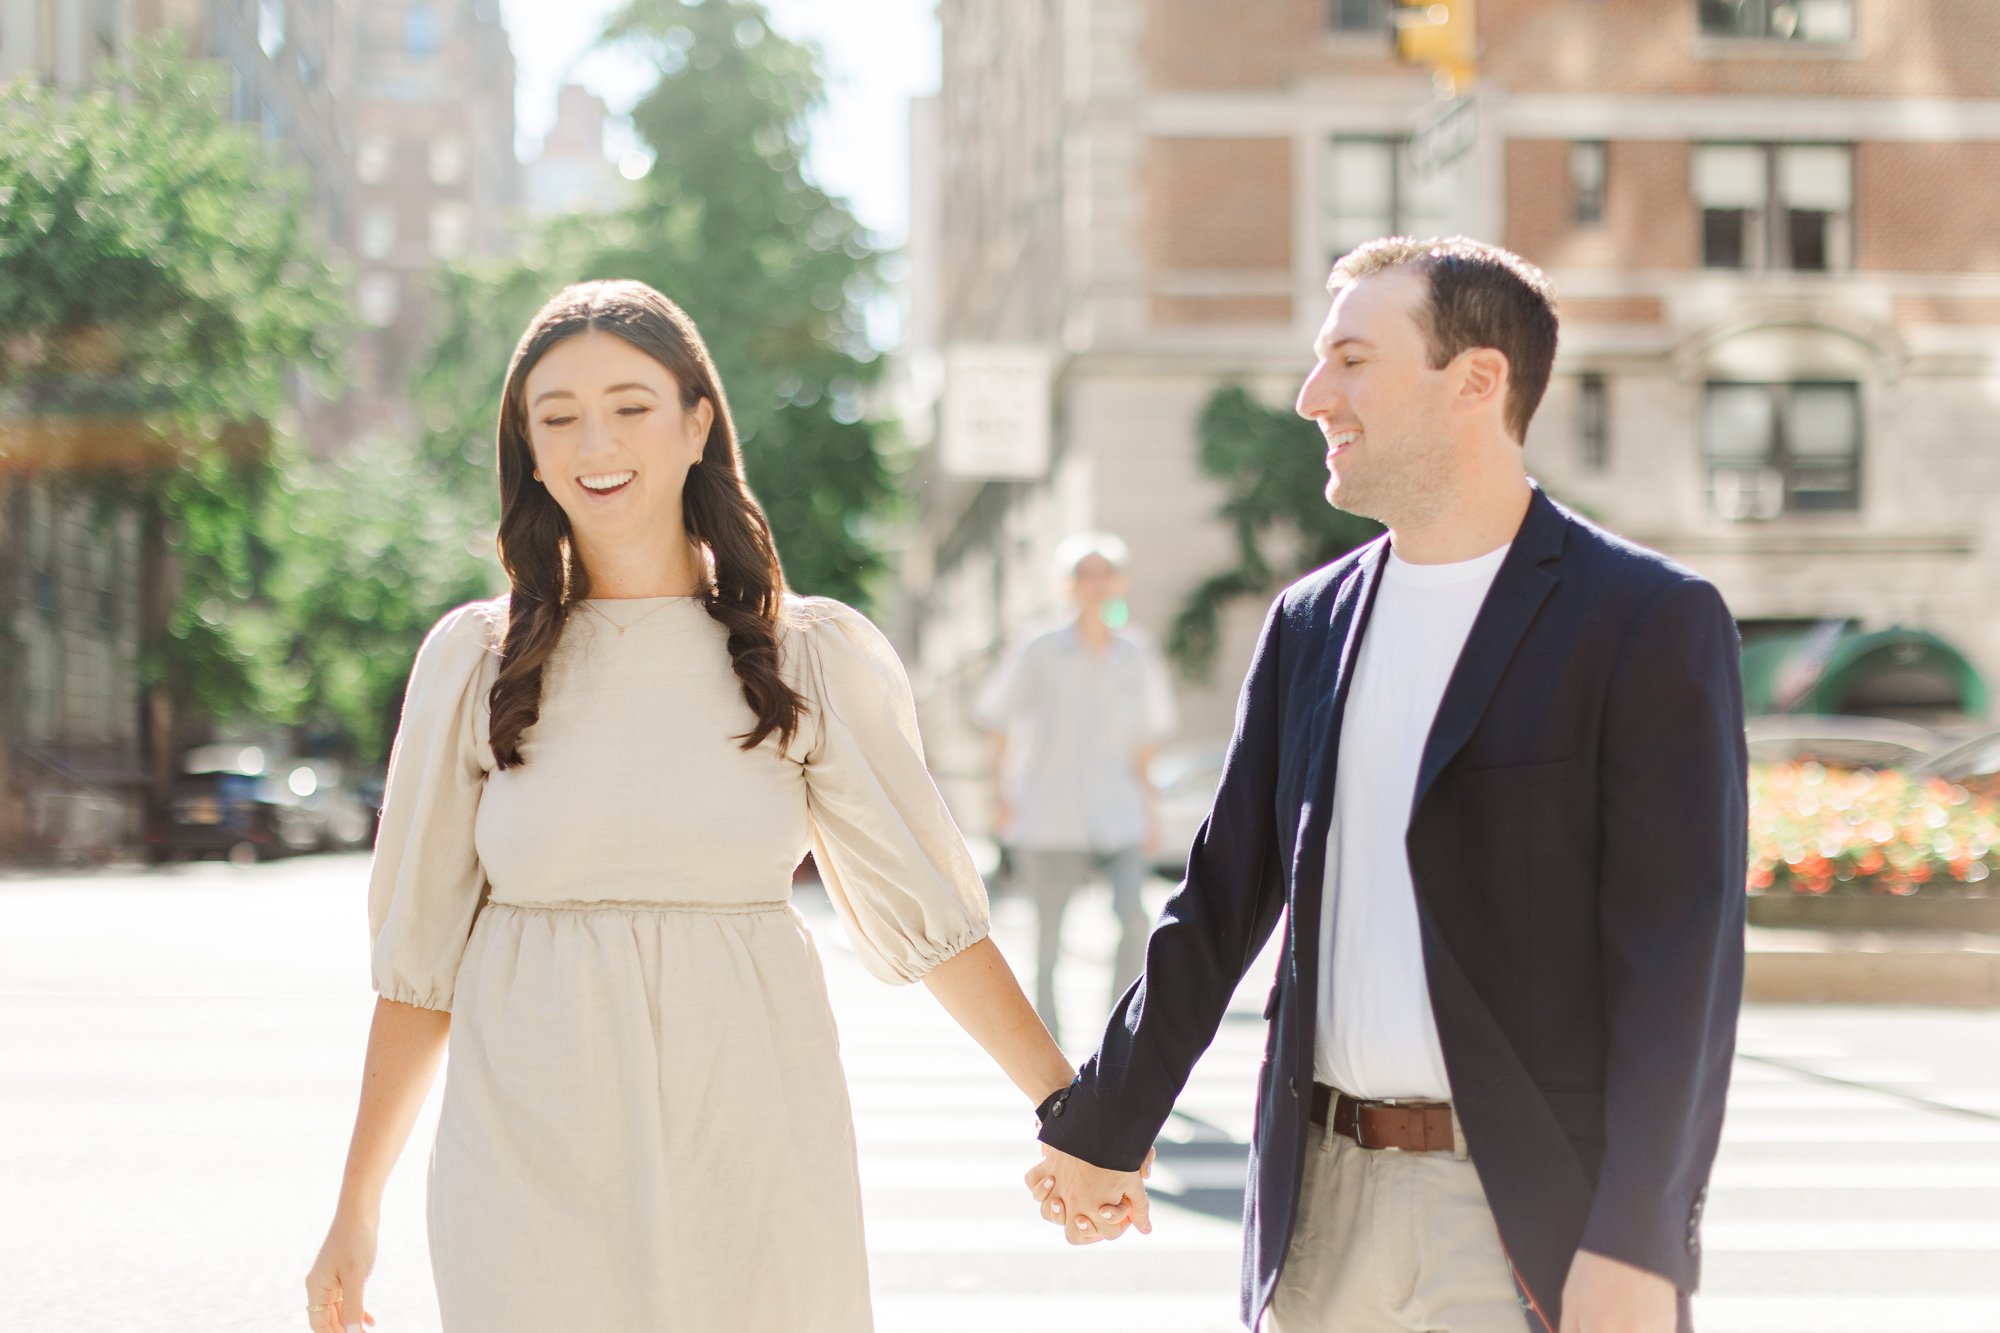 Dazzling Engagement Photos In Upper East Side